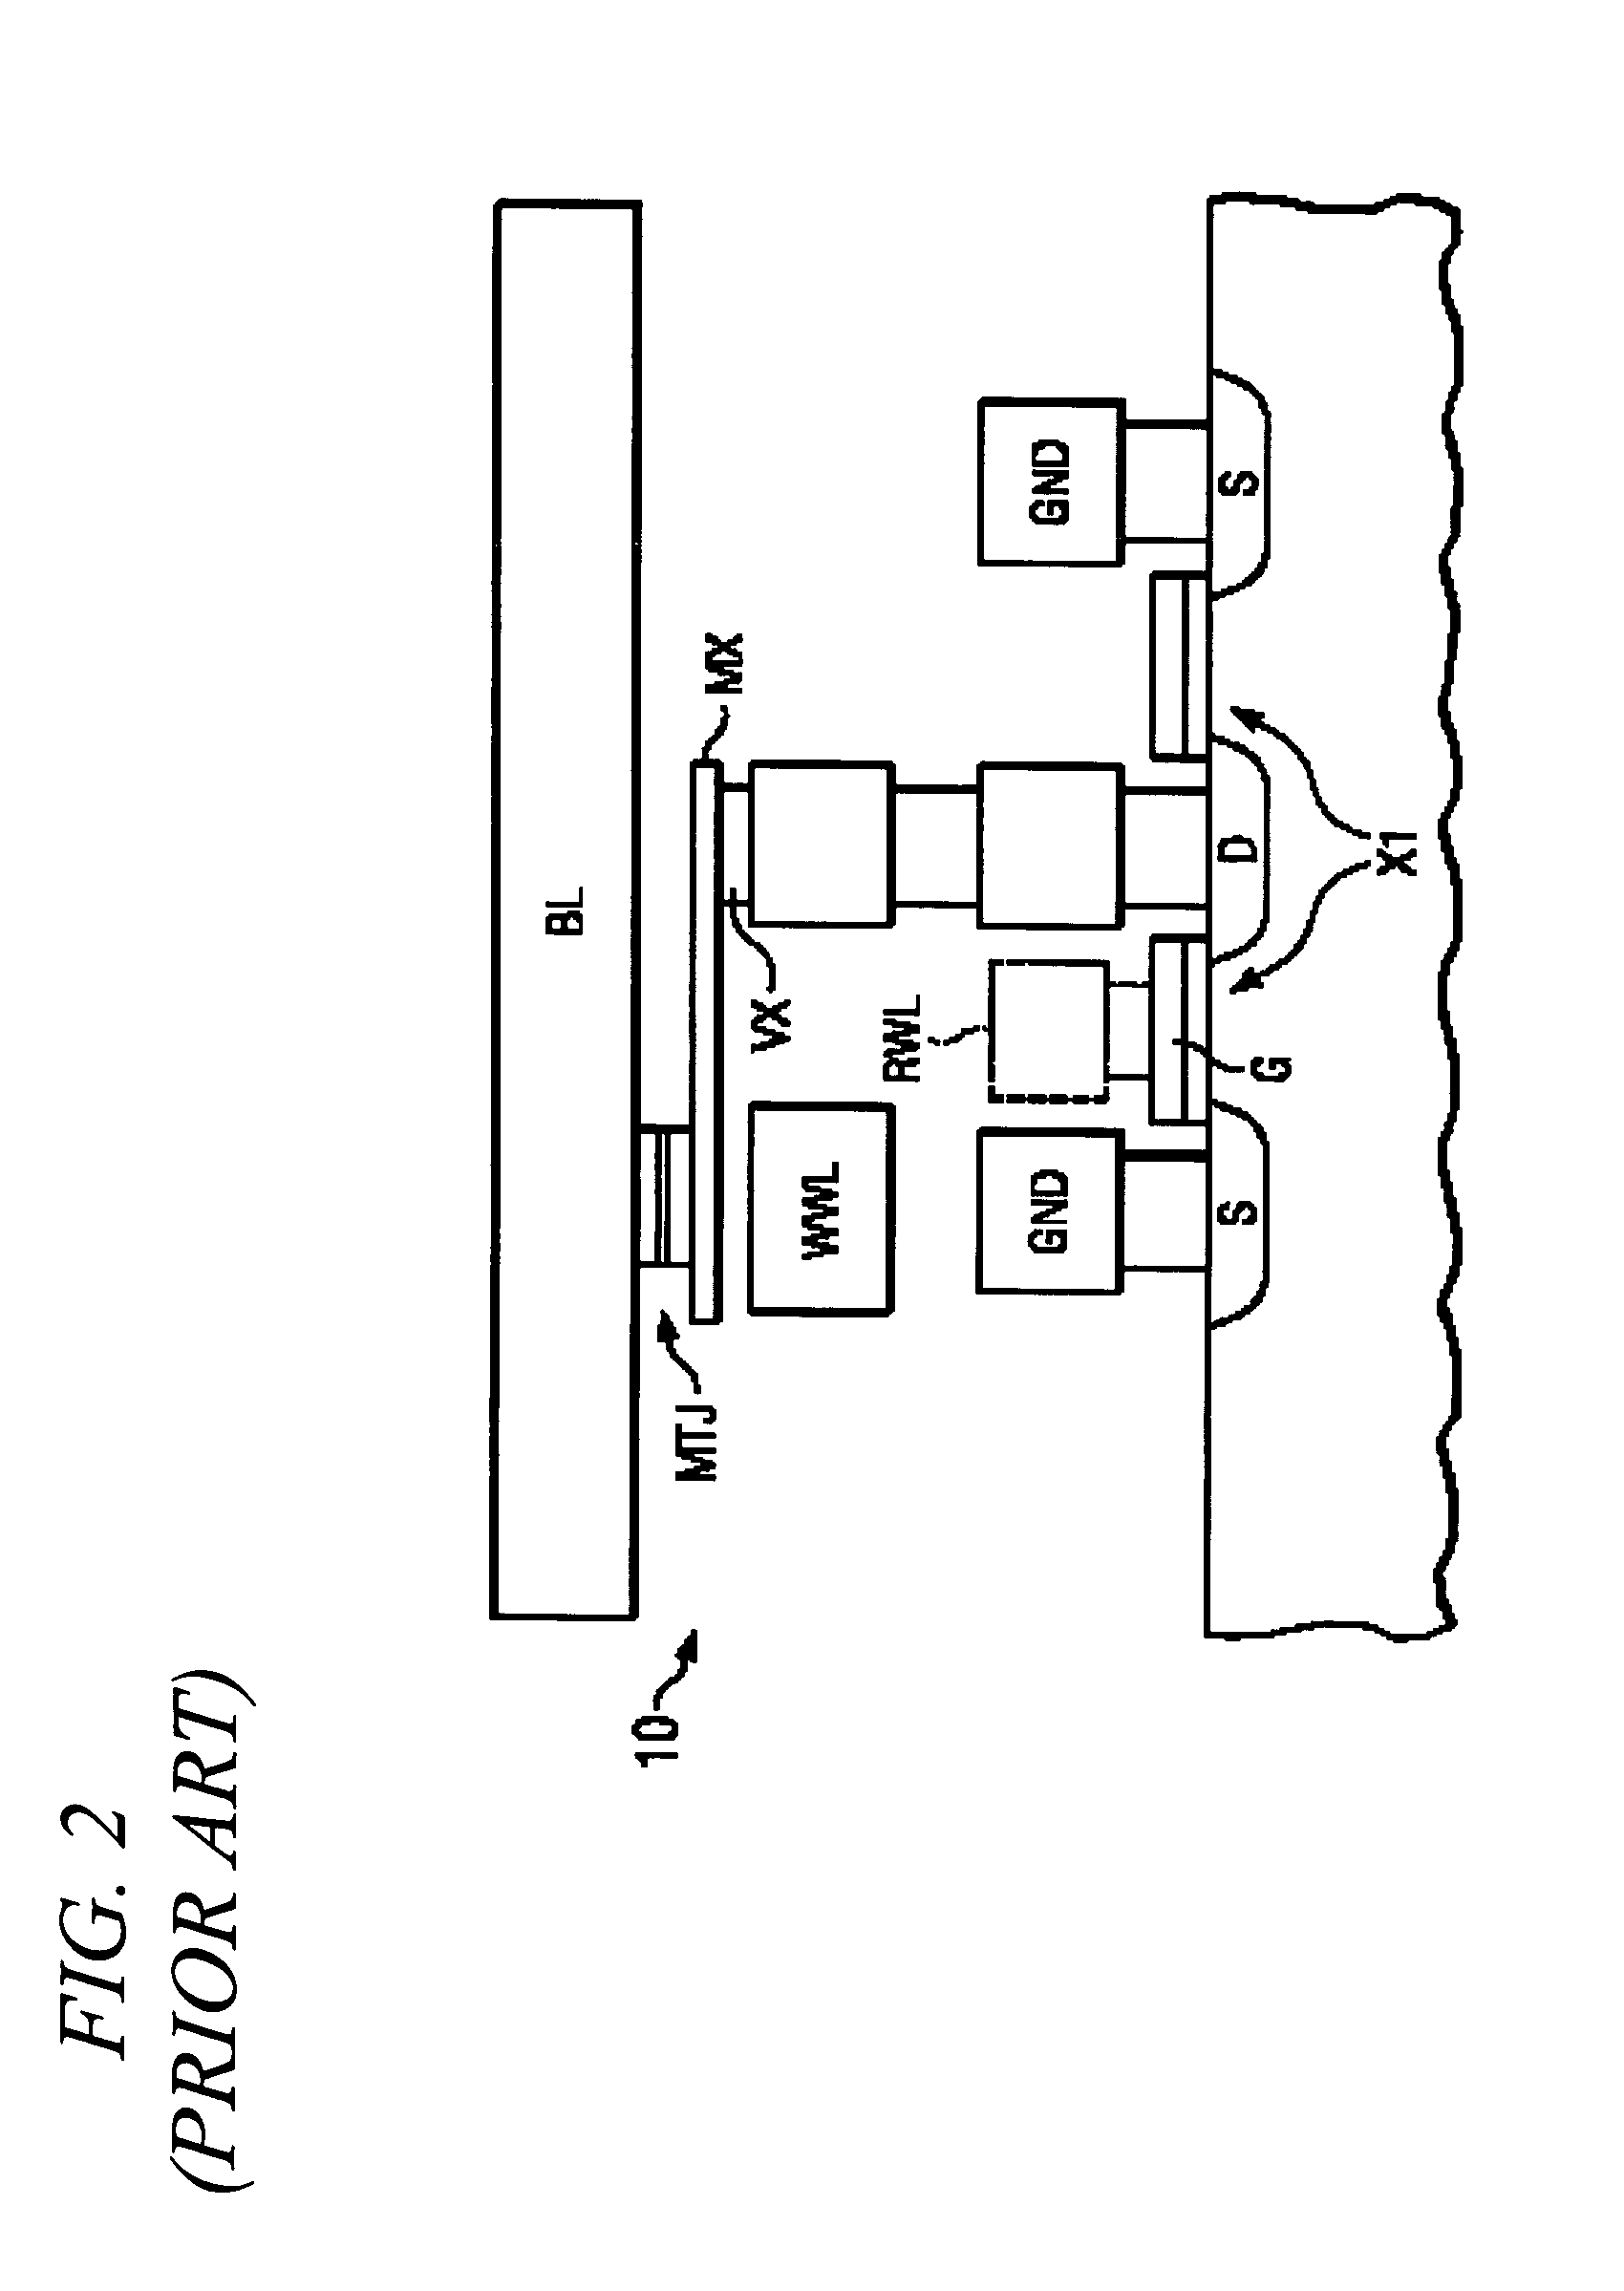 Reference current source for current sense amplifier and programmable resistor configured with magnetic tunnel junction cells